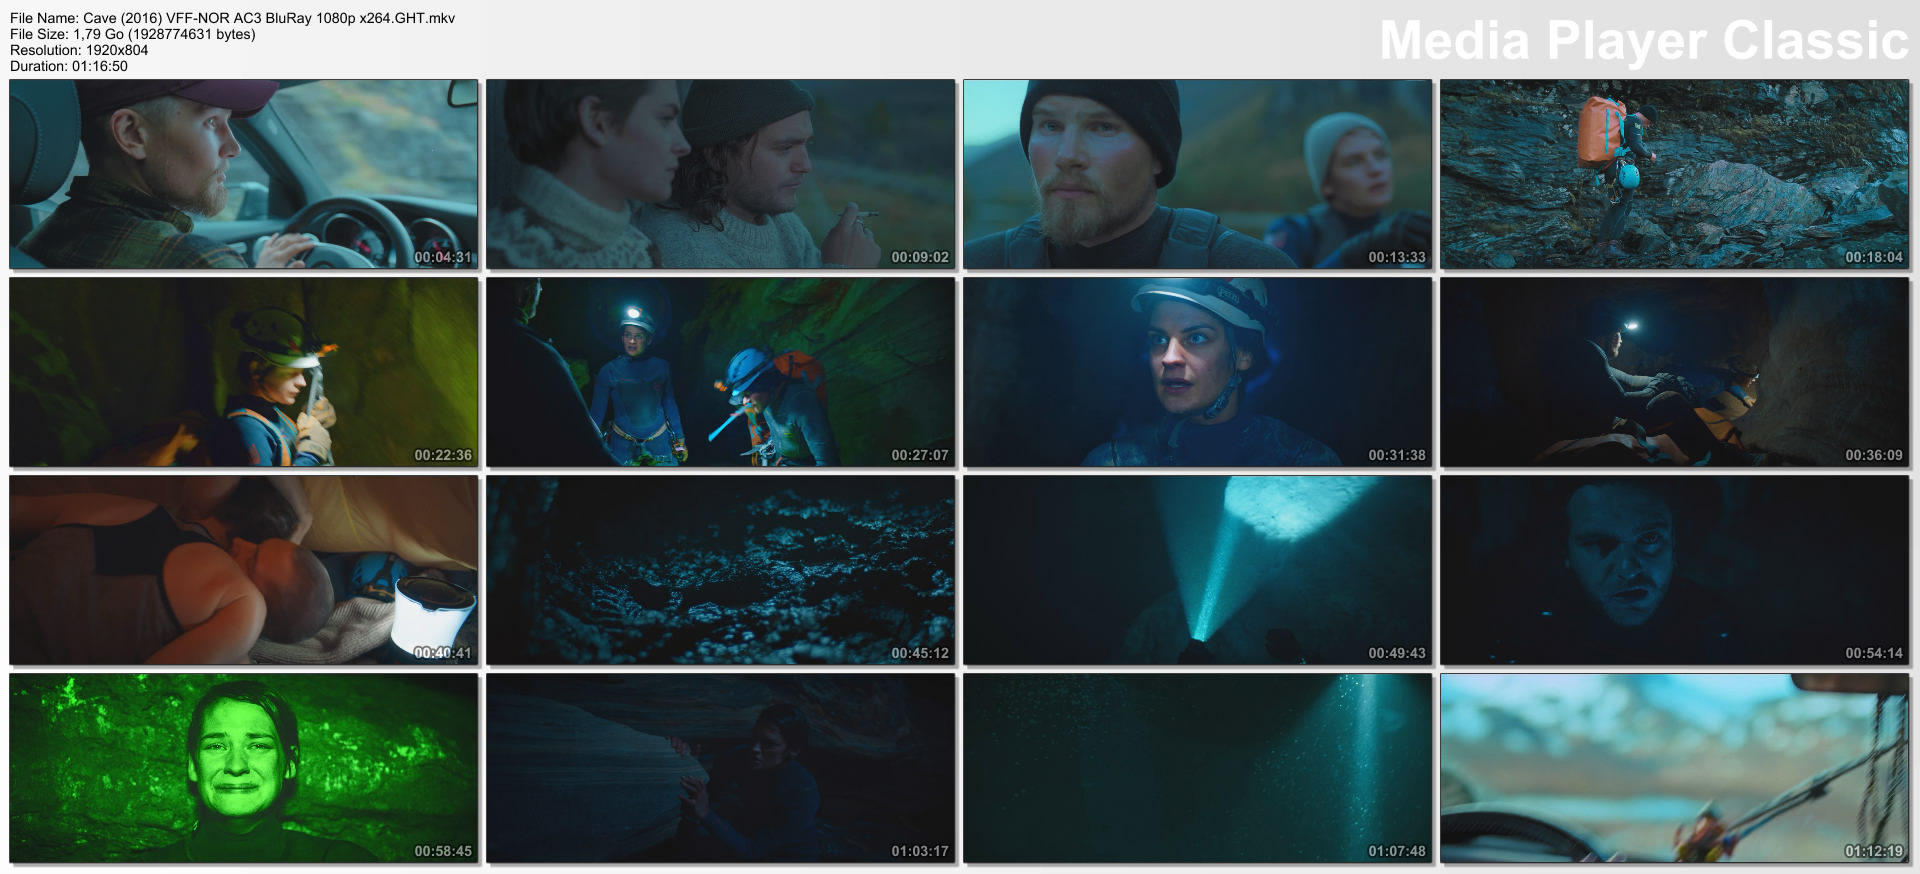 Cave (2016) VFF-NOR AC3 BluRay 1080p x264.GHT